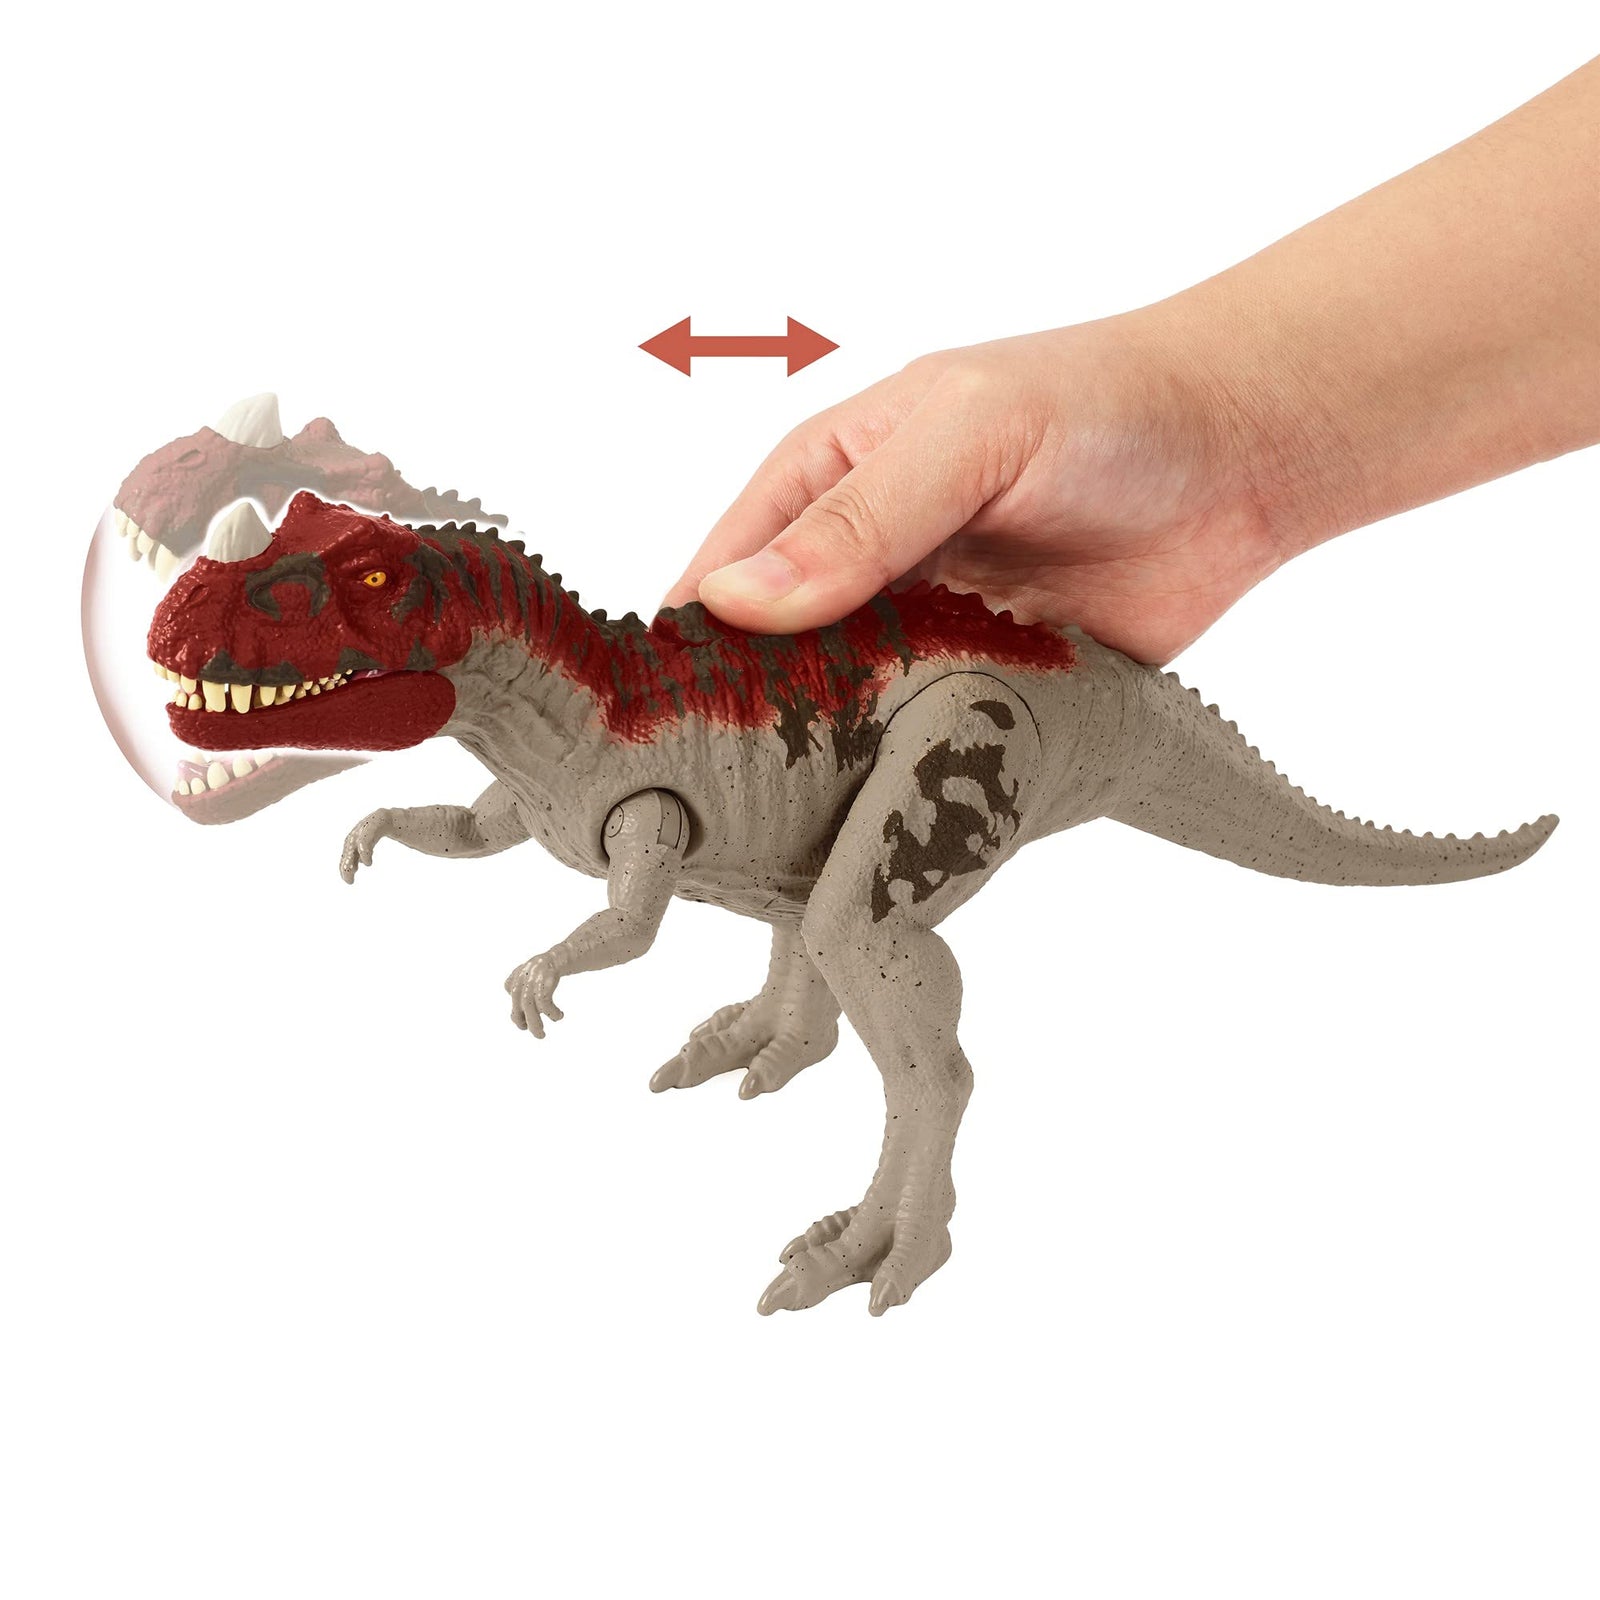 Jurassic World Roar Attack Ceratosaurus Camp Cretaceous Dinosaur Figure with Movable Joints, Realistic Sculpting, Strike Feature & Sounds, Carnivore, Kids Gift 4 Years & Up